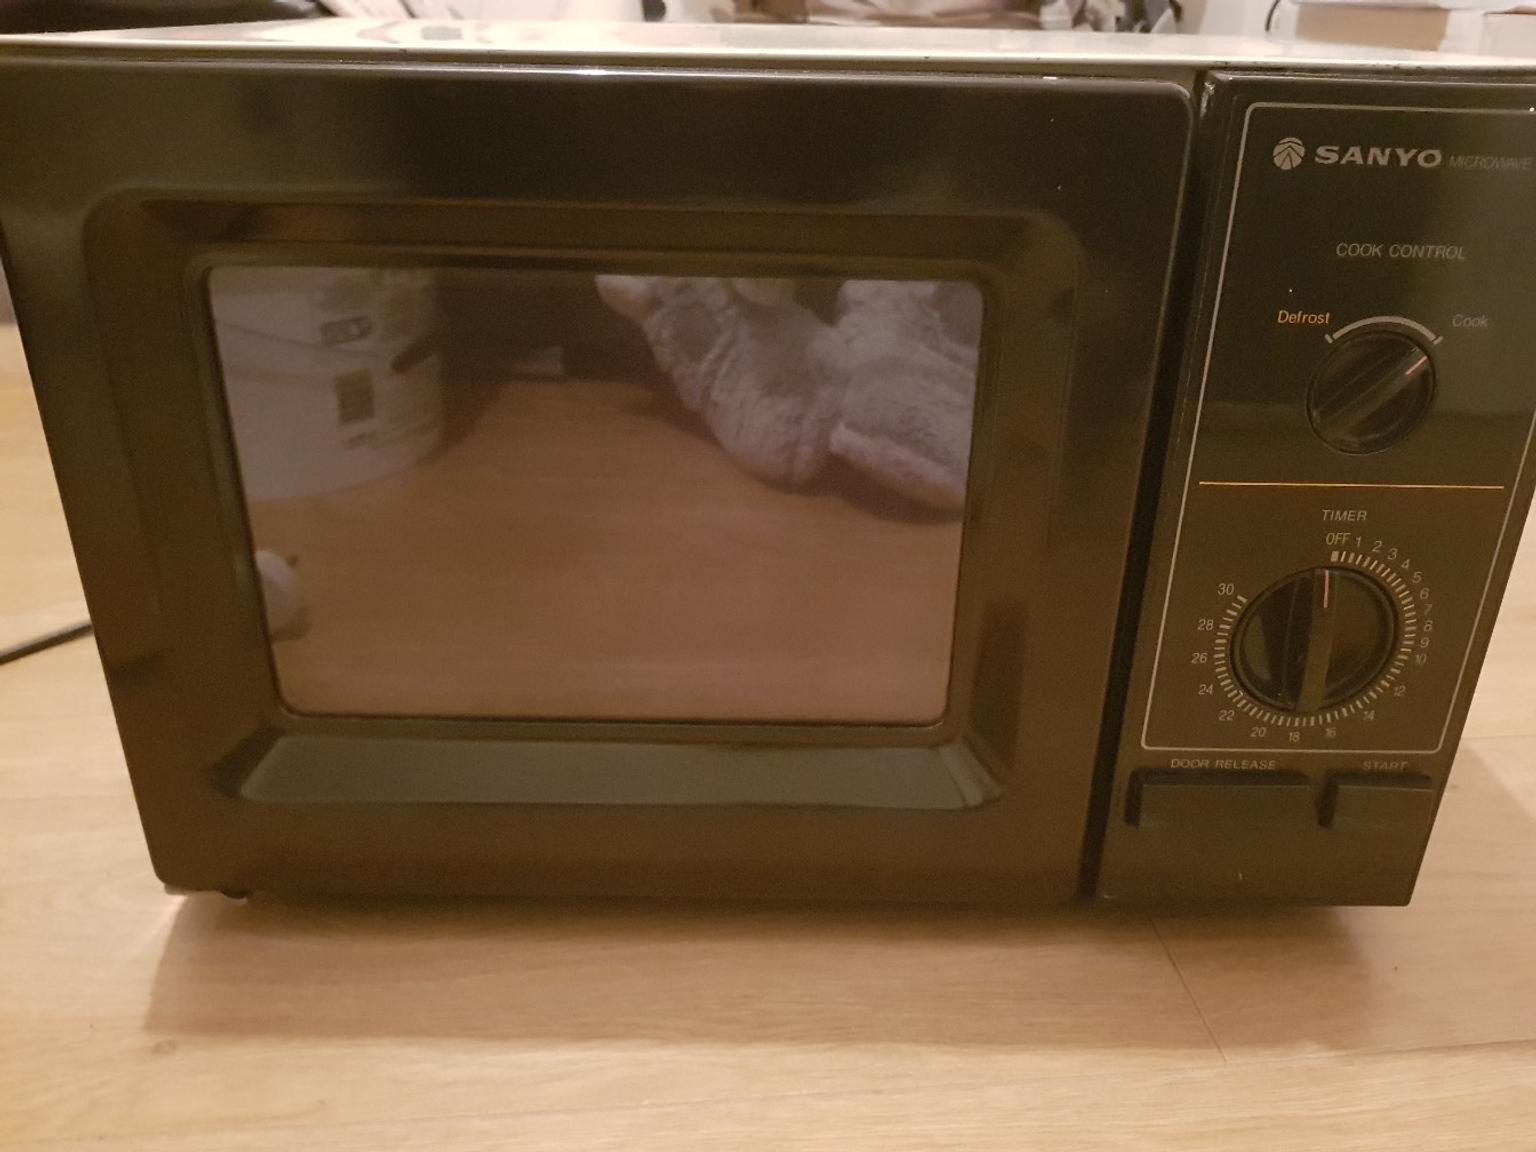 Old microwave in RG18 Thatcham for £10.00 for sale | Shpock